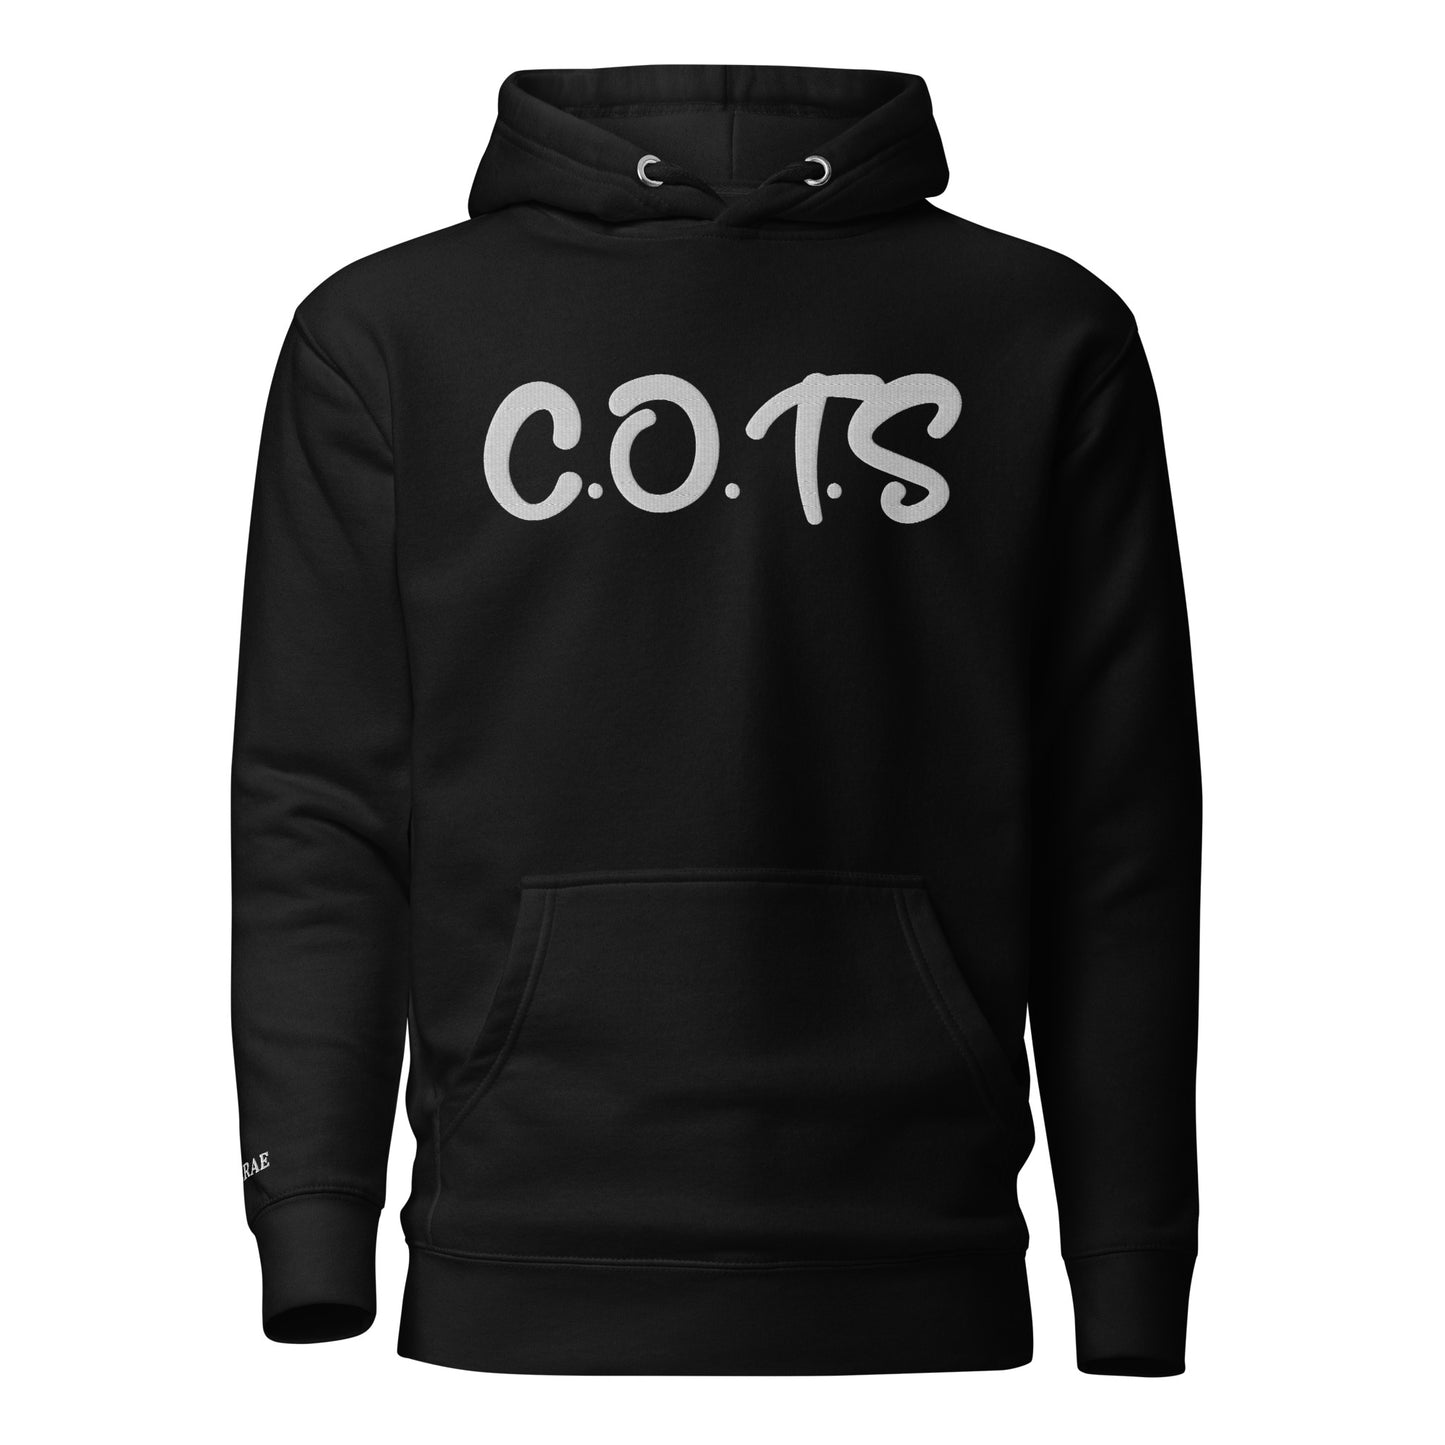 C.O.T.S Stitched Unisex Hoodie